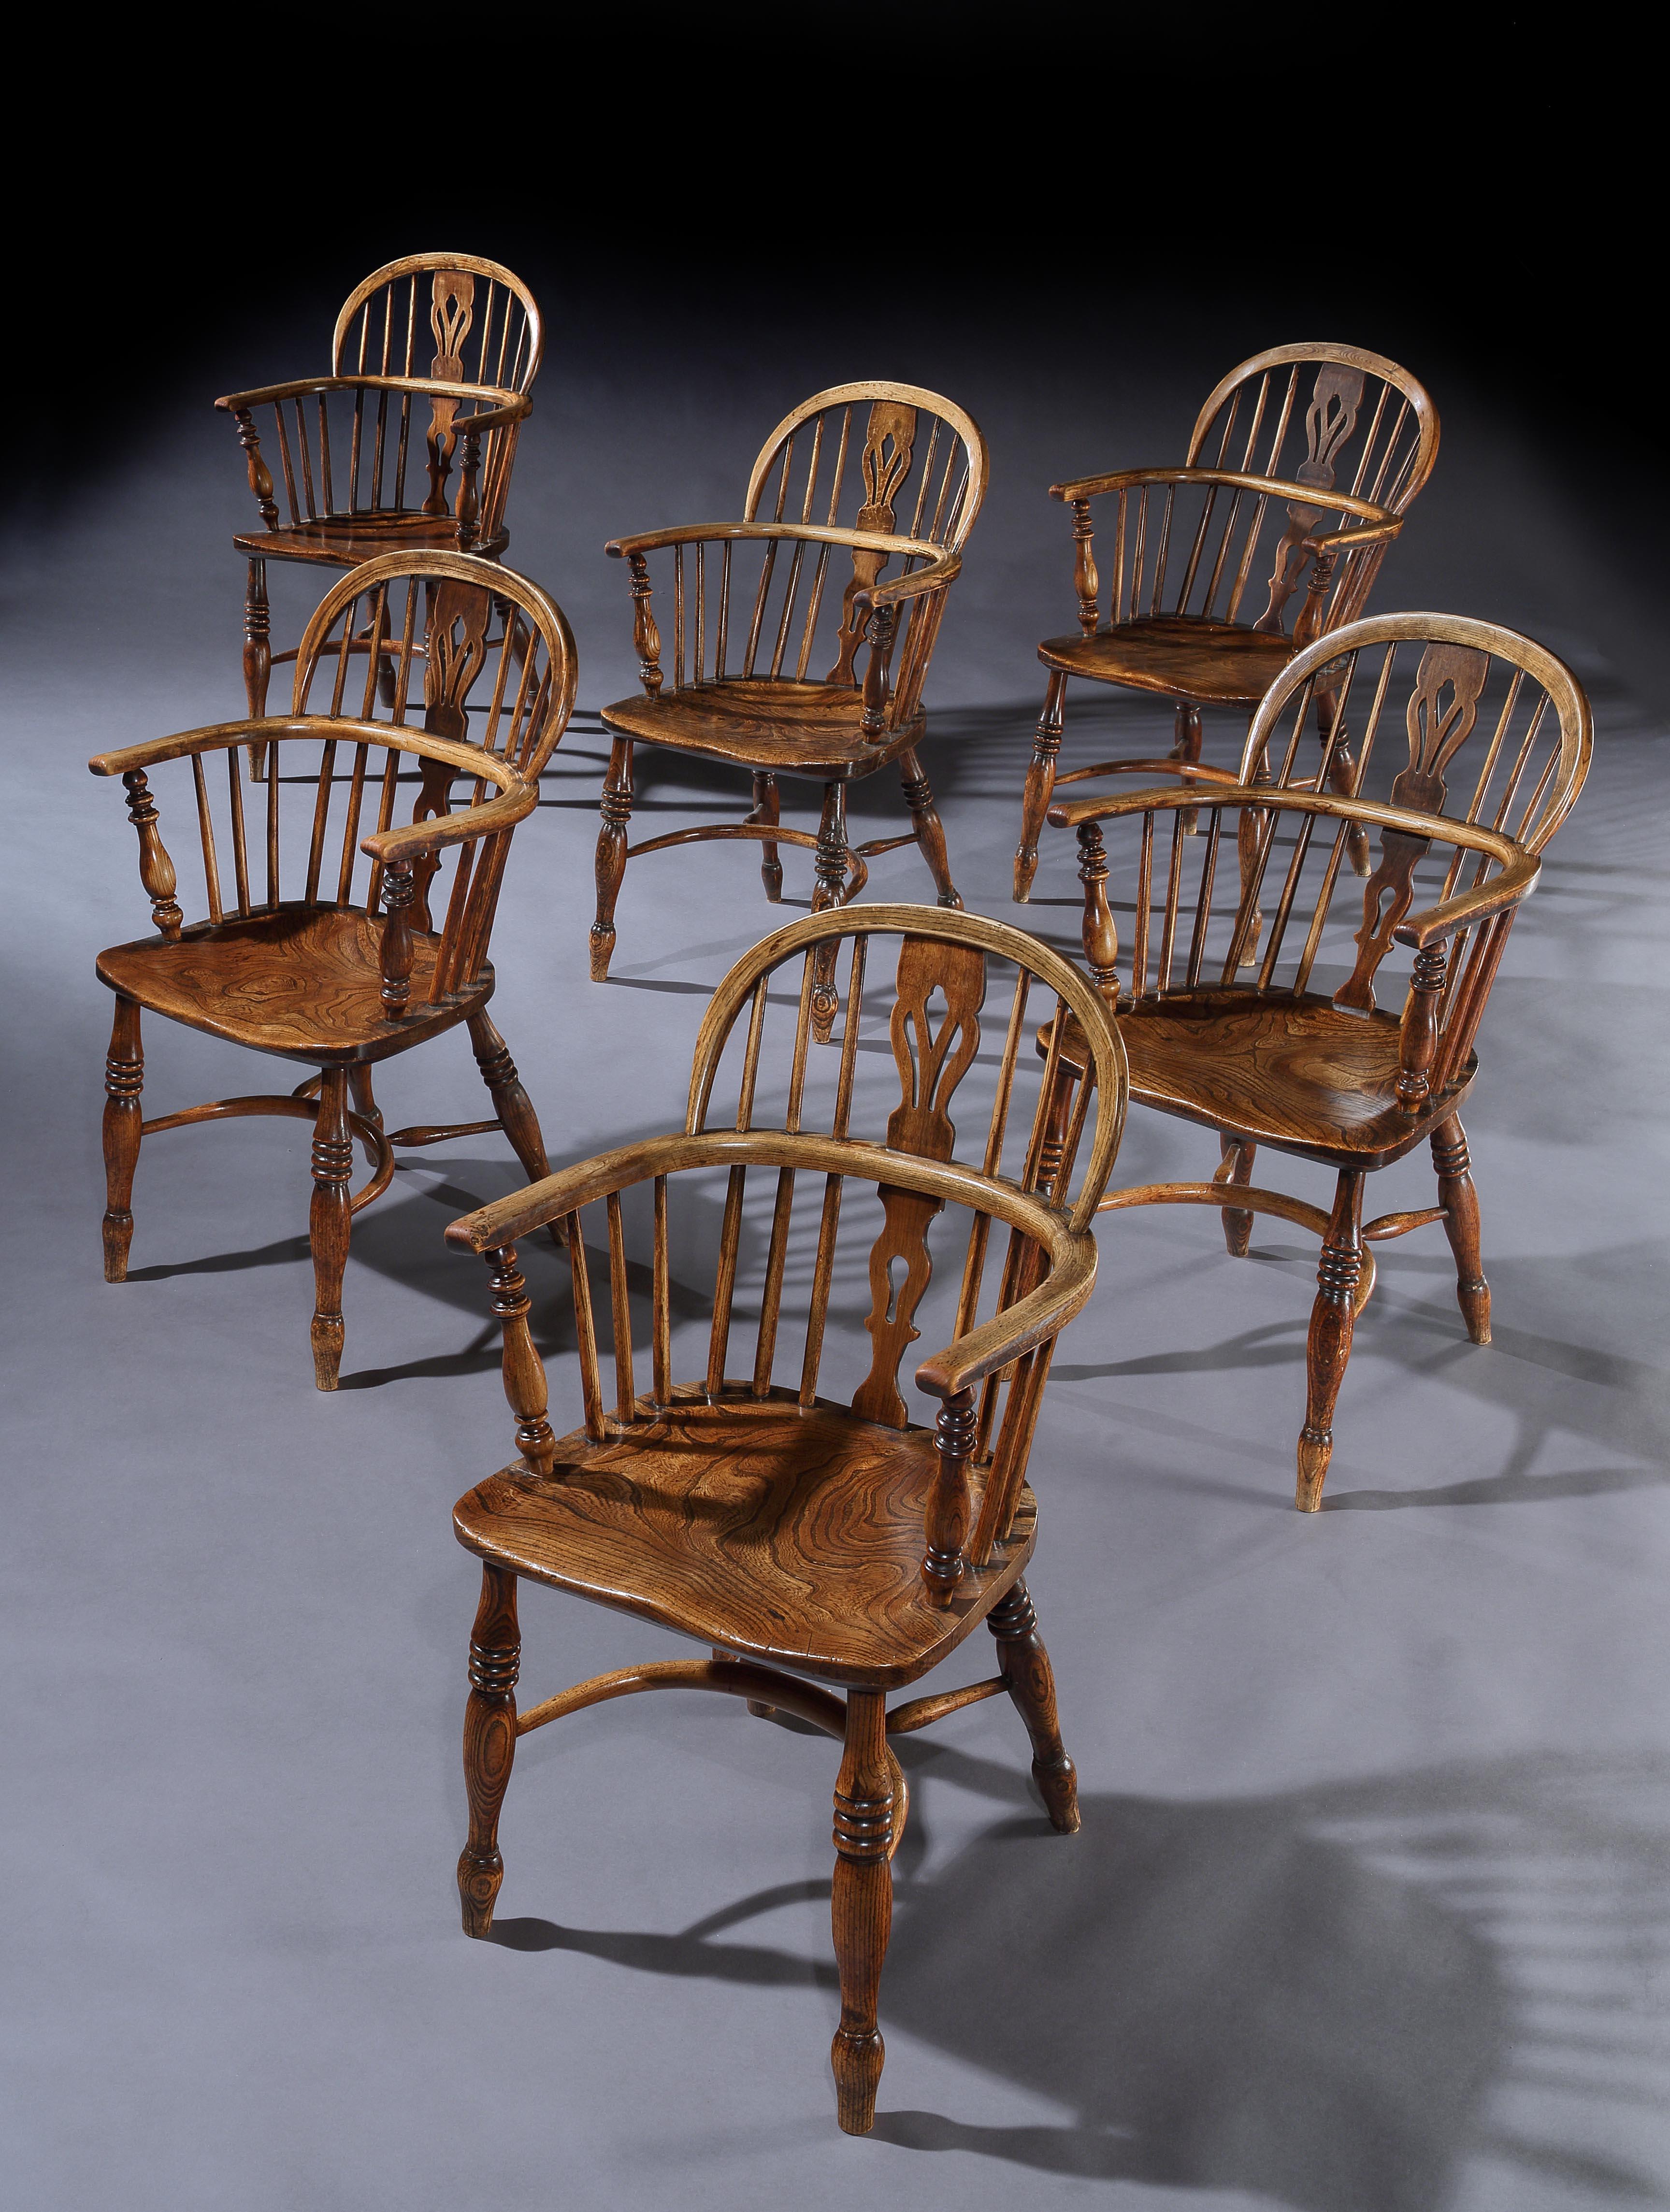 Striking and characterful set of six elm and ash vernacular or folk Windsor armchairs
The yew, elm and ash used have been selected for their exceptional figuring, colour and patina
Fine model with vase splat, hoop back, crinoline stretchers and